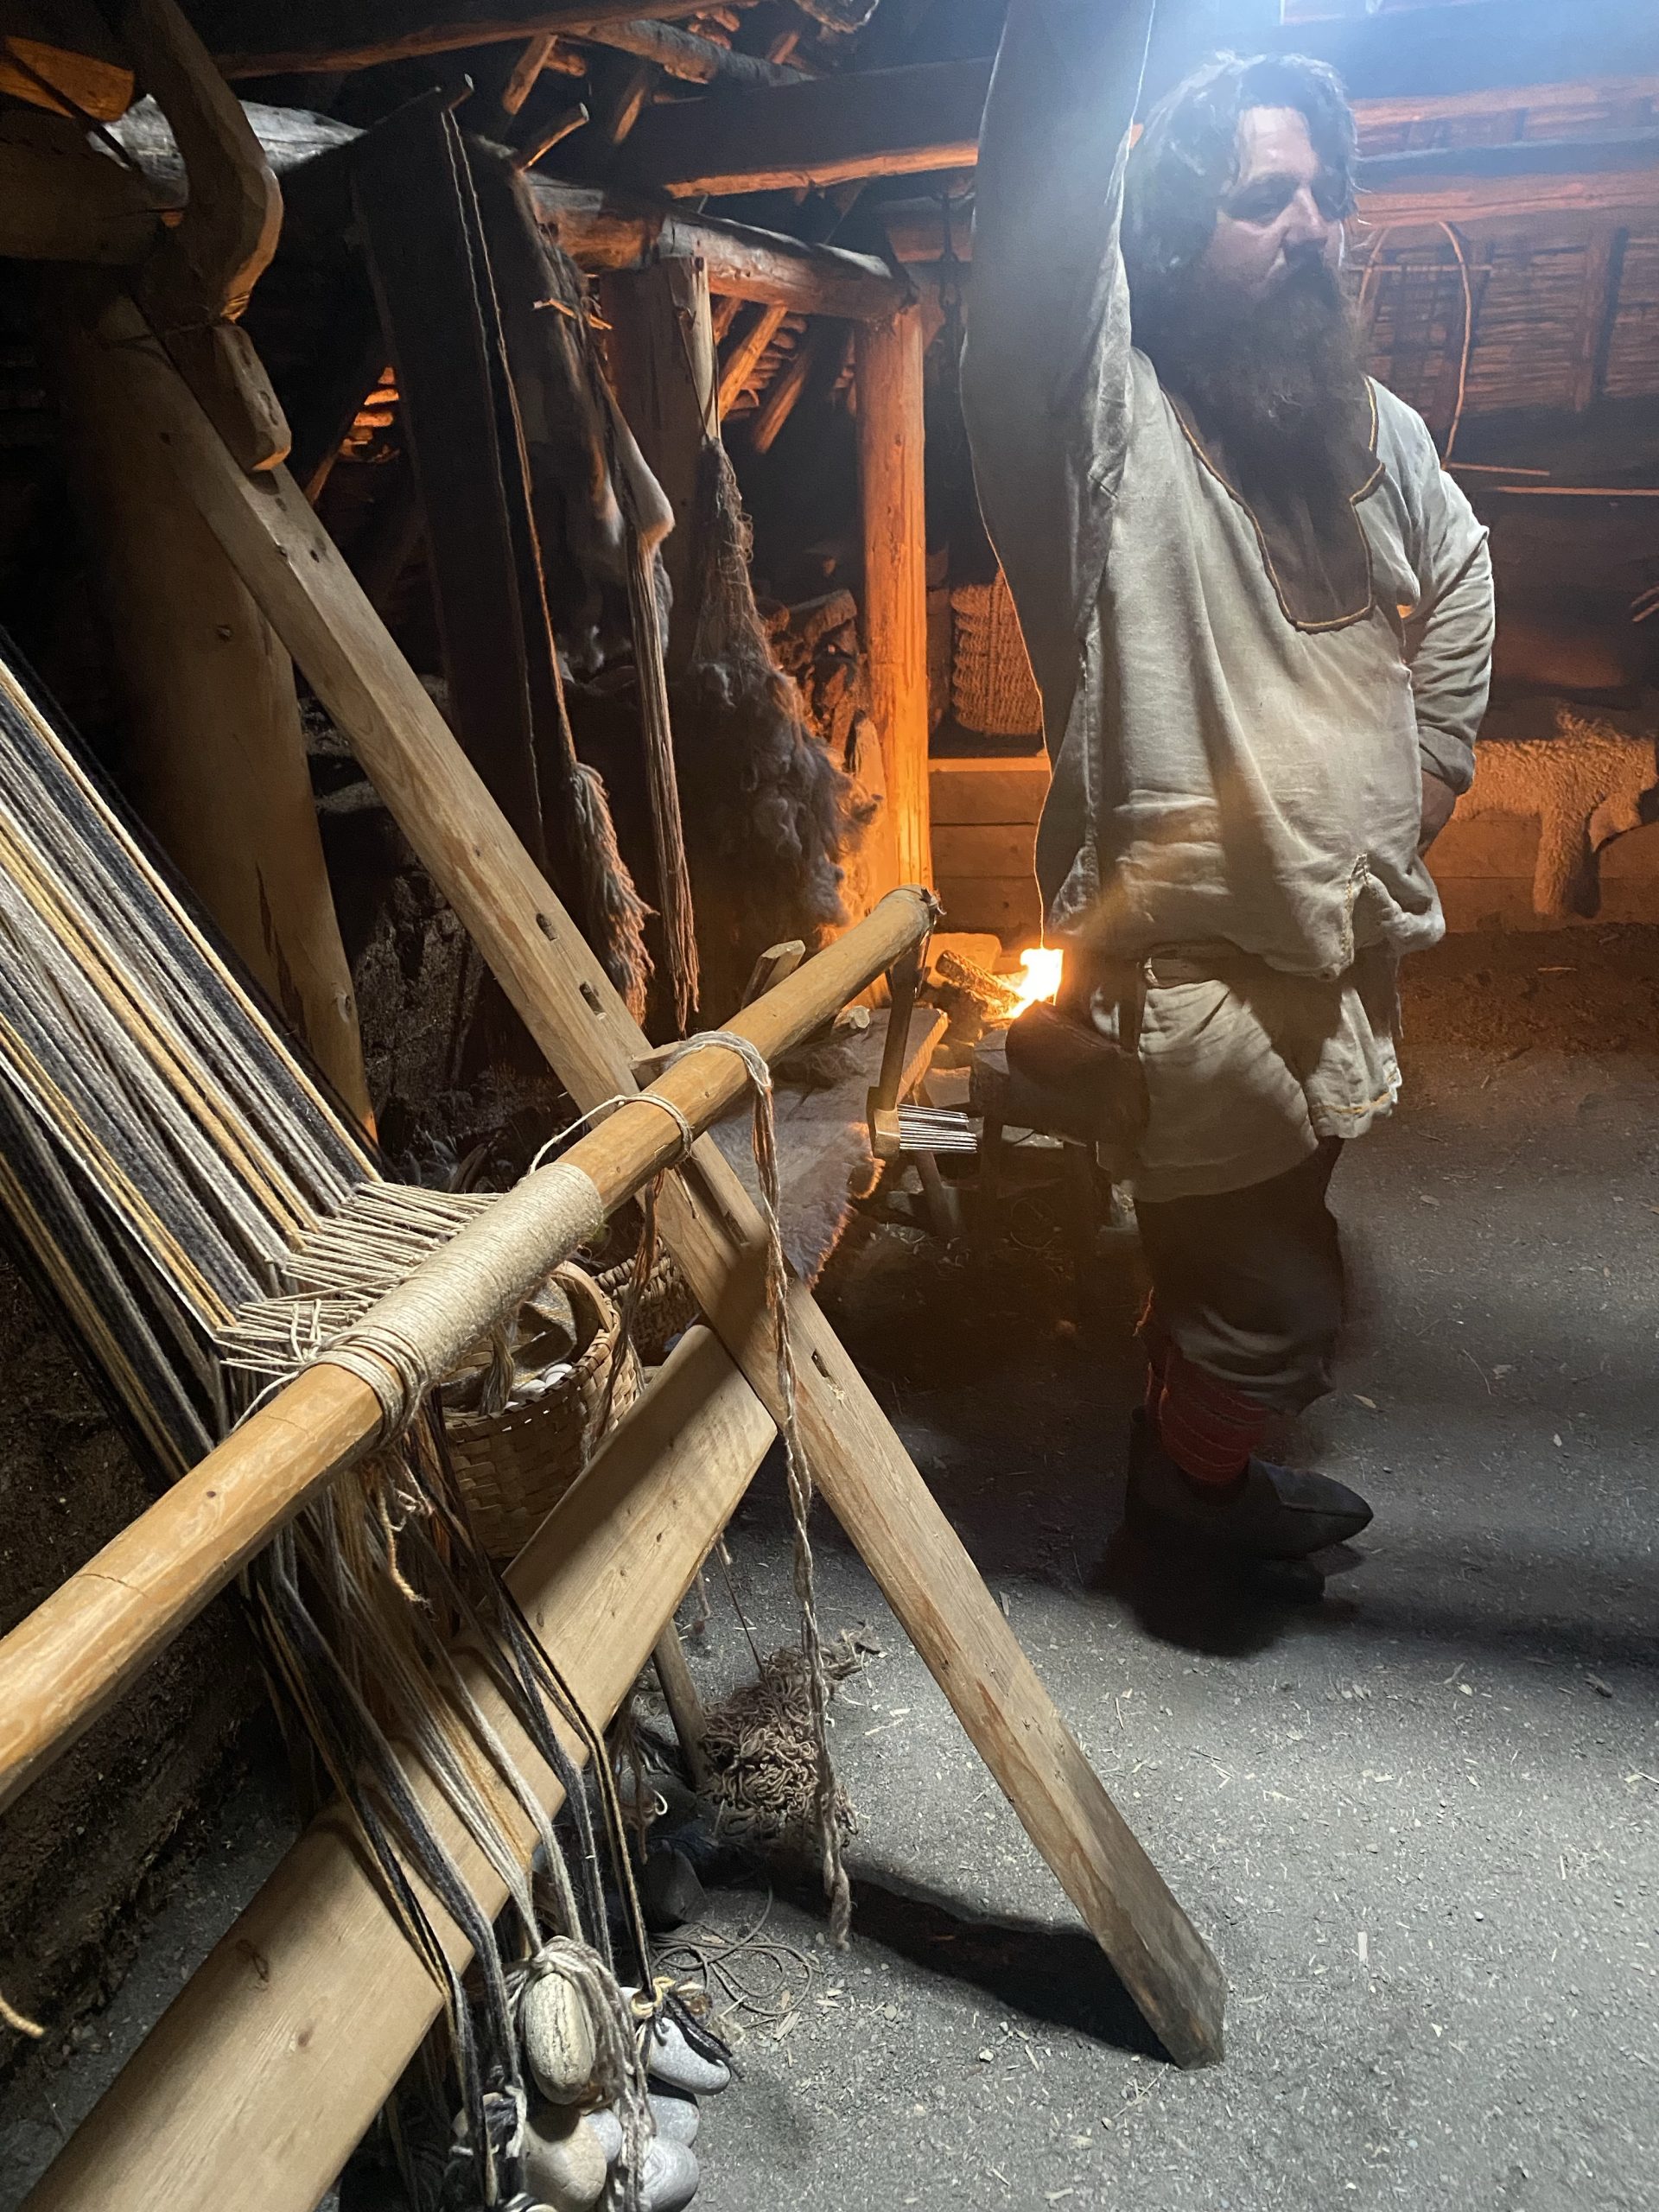 Ragnar (character name) stands behind a loom in the women’s work room in a re-created 1,000 year old Norse sod house.